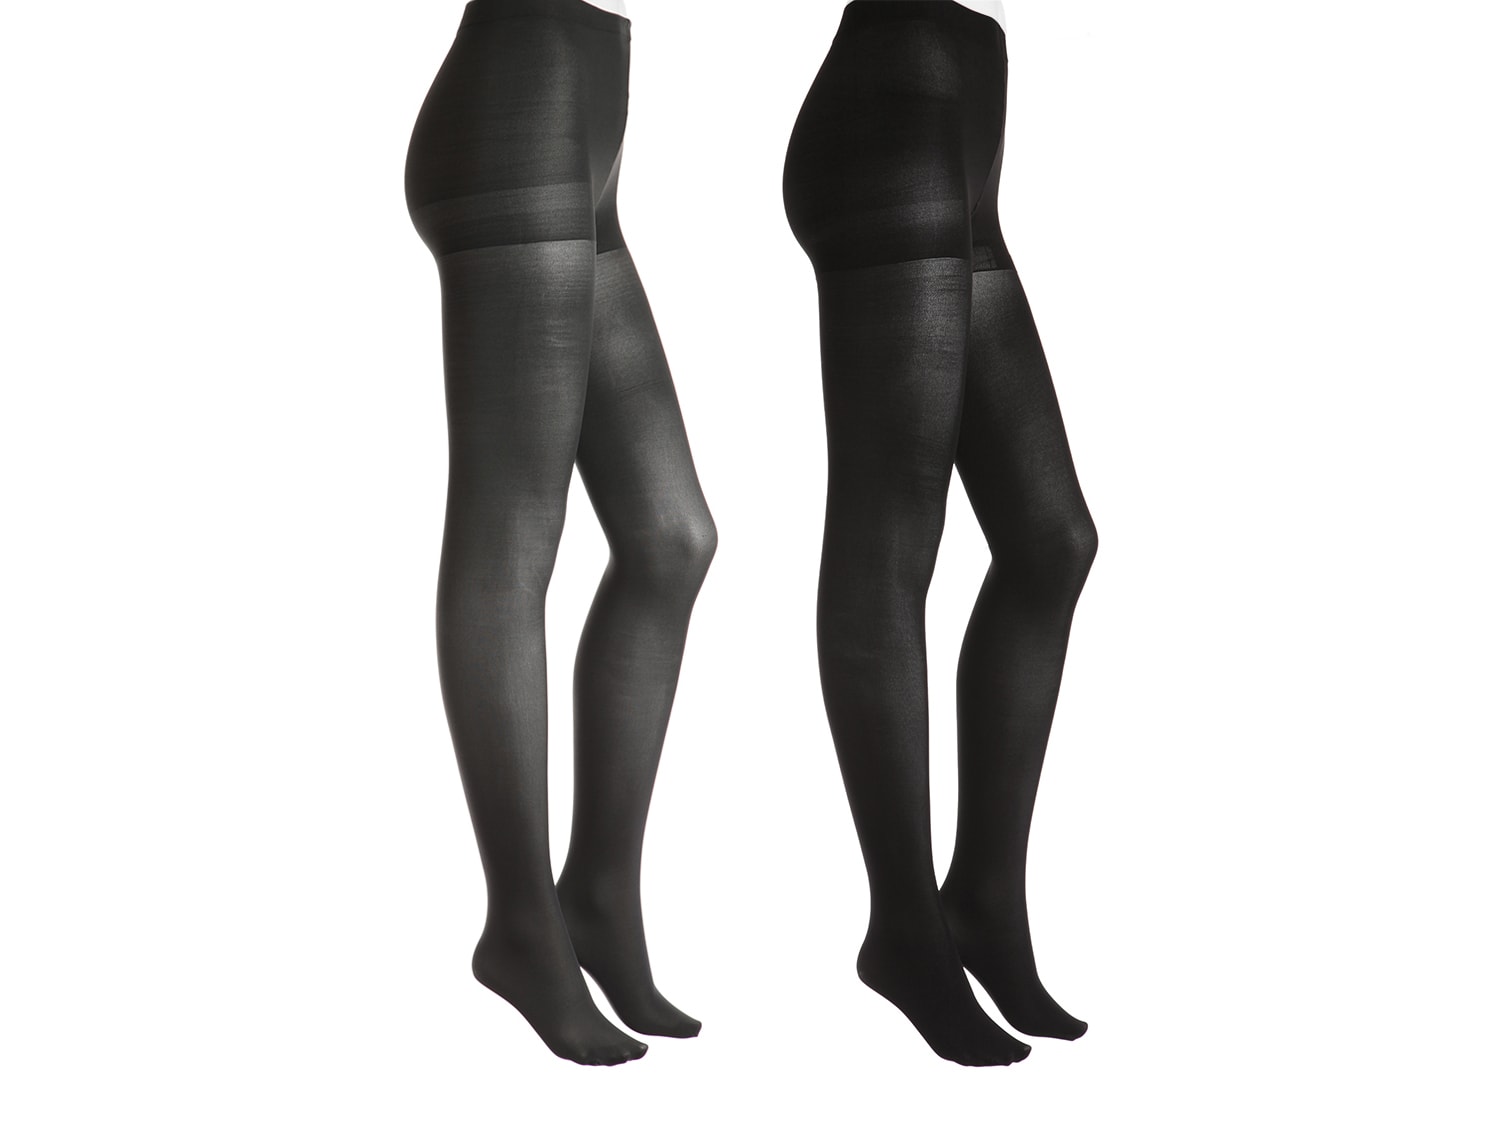 Hue Women's Blackout Tights with Control Top, Black, 3 (U20382) at   Women's Clothing store